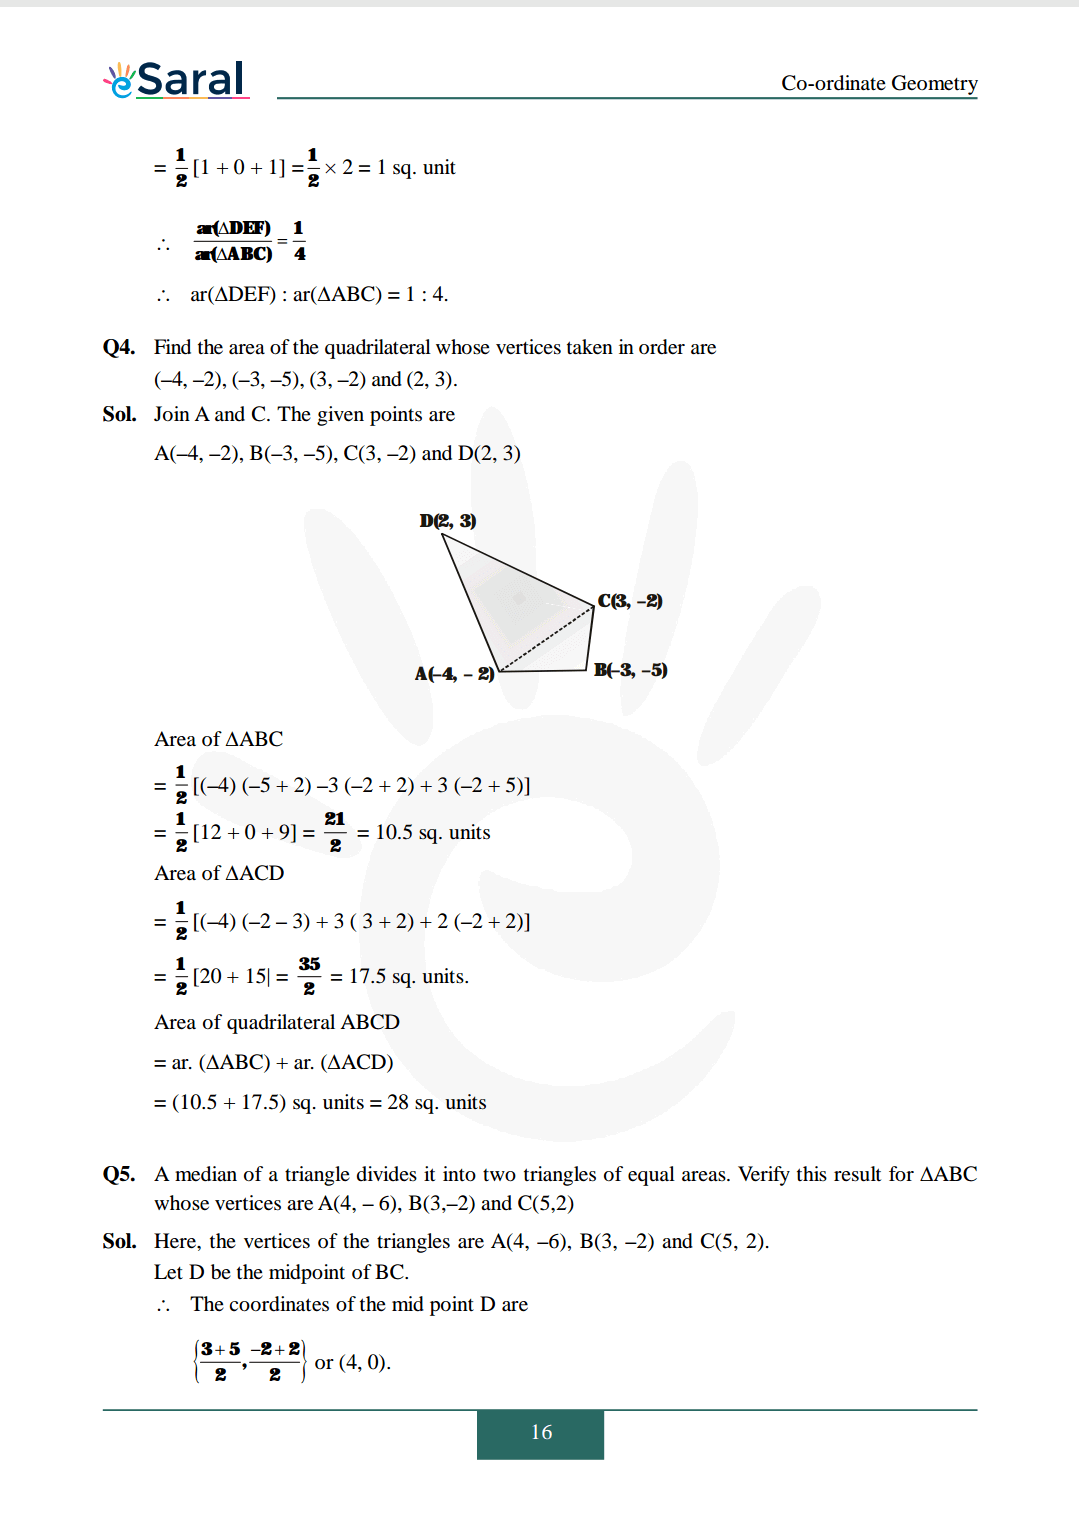 Class 10 Maths Chapter 7 exercise 7.3 solutions Image 3